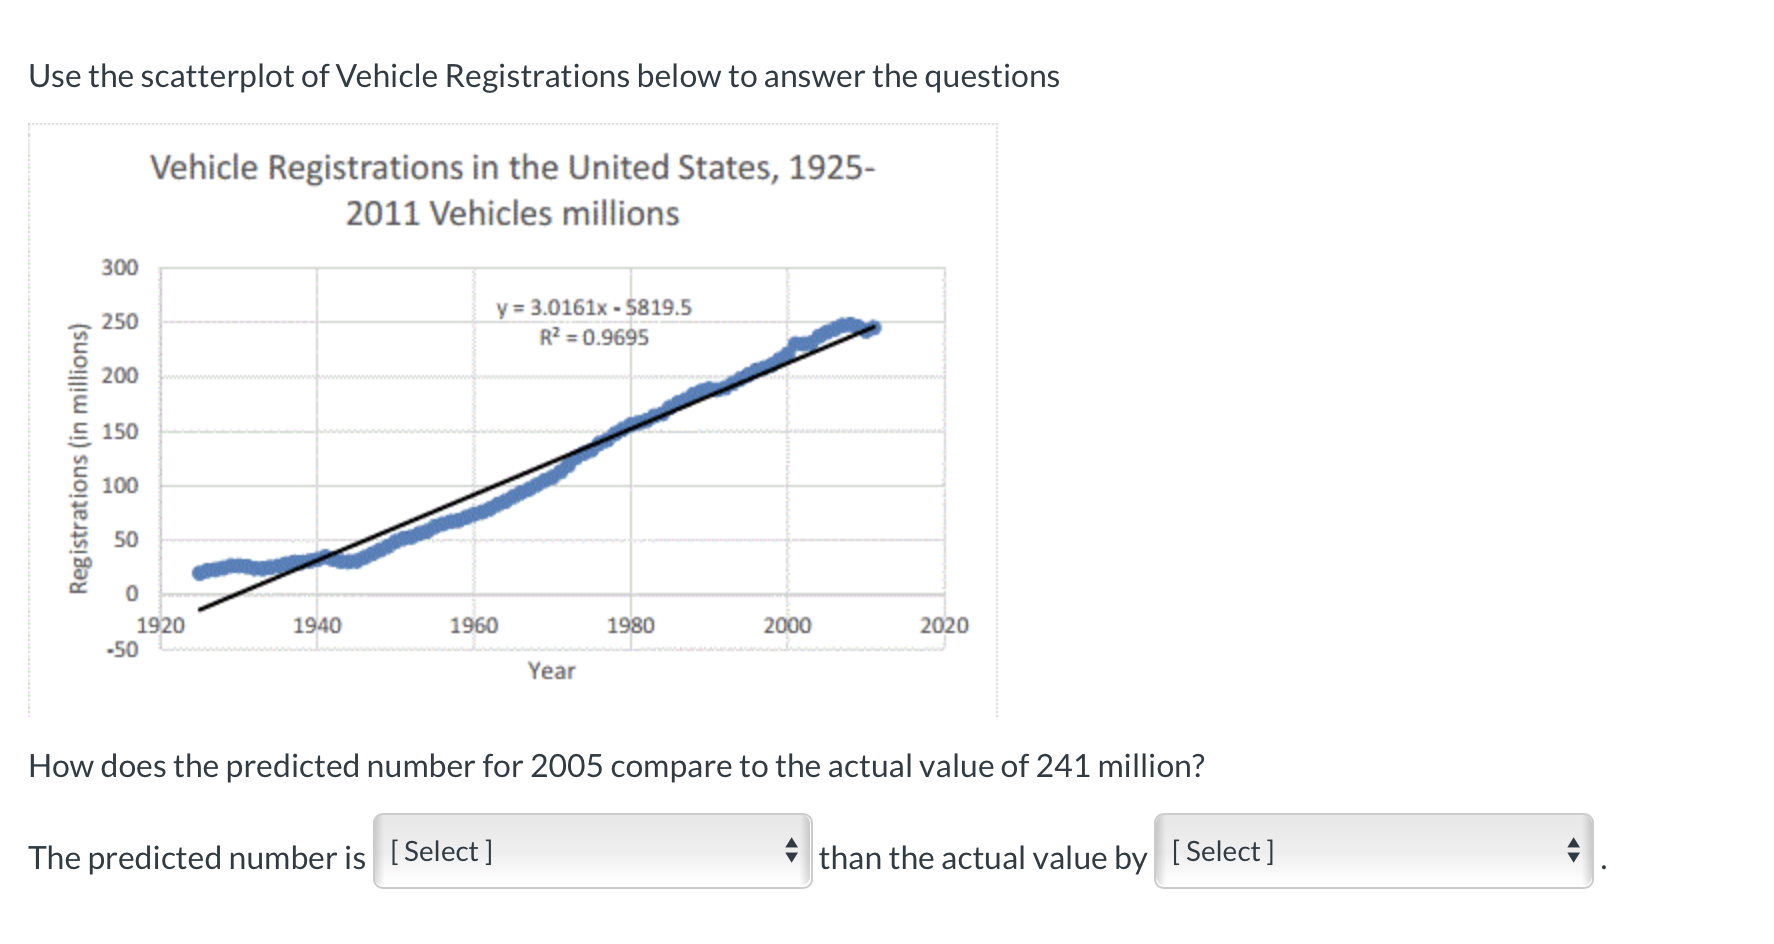 Use the scatterplot of Vehicle Registrations below to answer the questions
Vehicle Registrations in the United States, 1925-
2011 Vehicles millions
300
y = 3.0161x - 5819.5
R? = 0.9695
250
200
150
100
50
1960
1920
-50
1940
1980
2000
2020
Year
How does the predicted number for 2005 compare to the actual value of 241 million?
The predicted number is [Select]
i than the actual value by [ Select]
Registrations (in millions)
